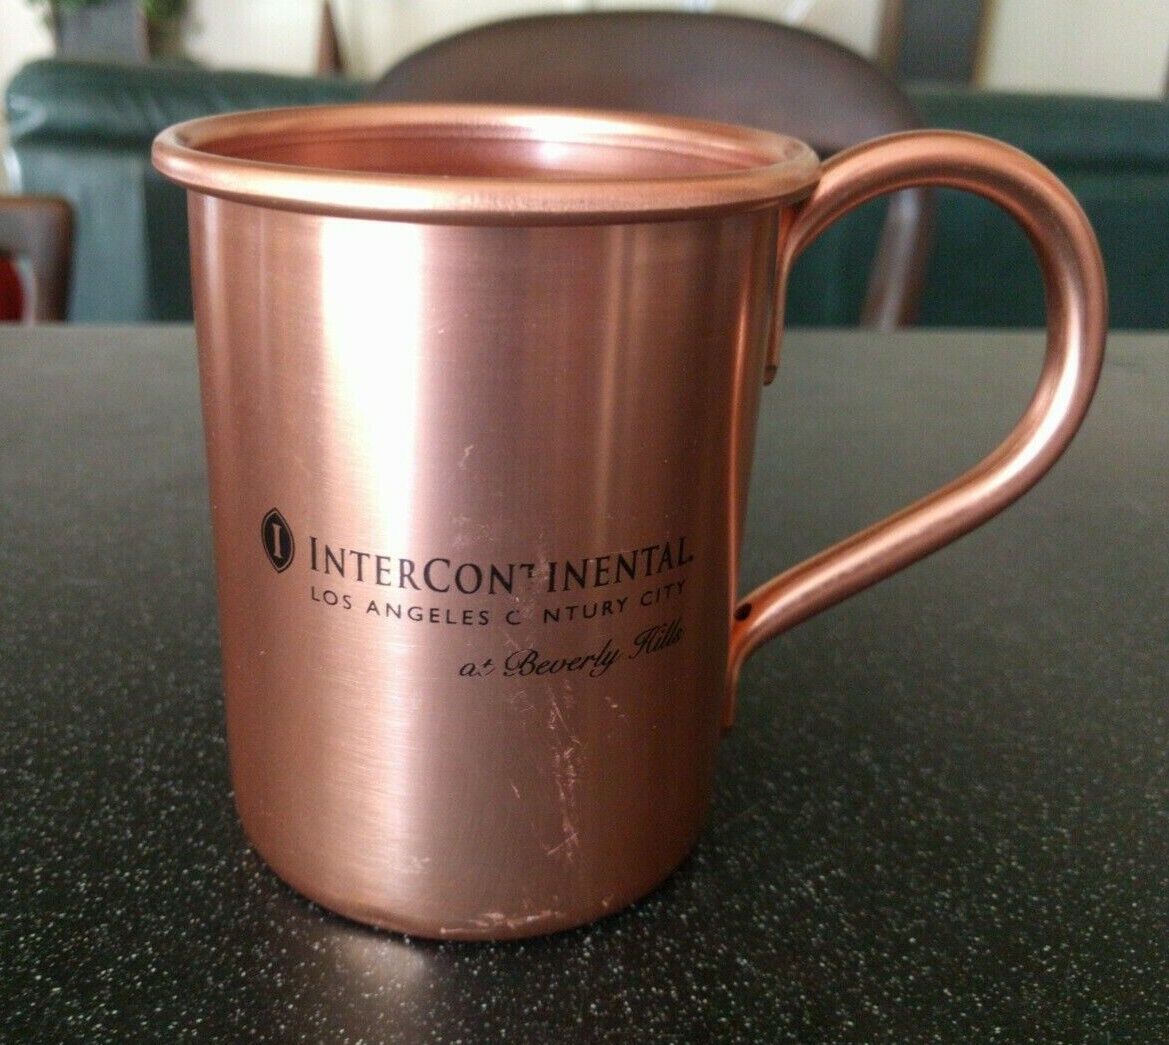 INTERCONTINENTAL HOTEL LOS ANGELES CENTURY CITY BEVERLY HILLS MOSCOW MULE CUP